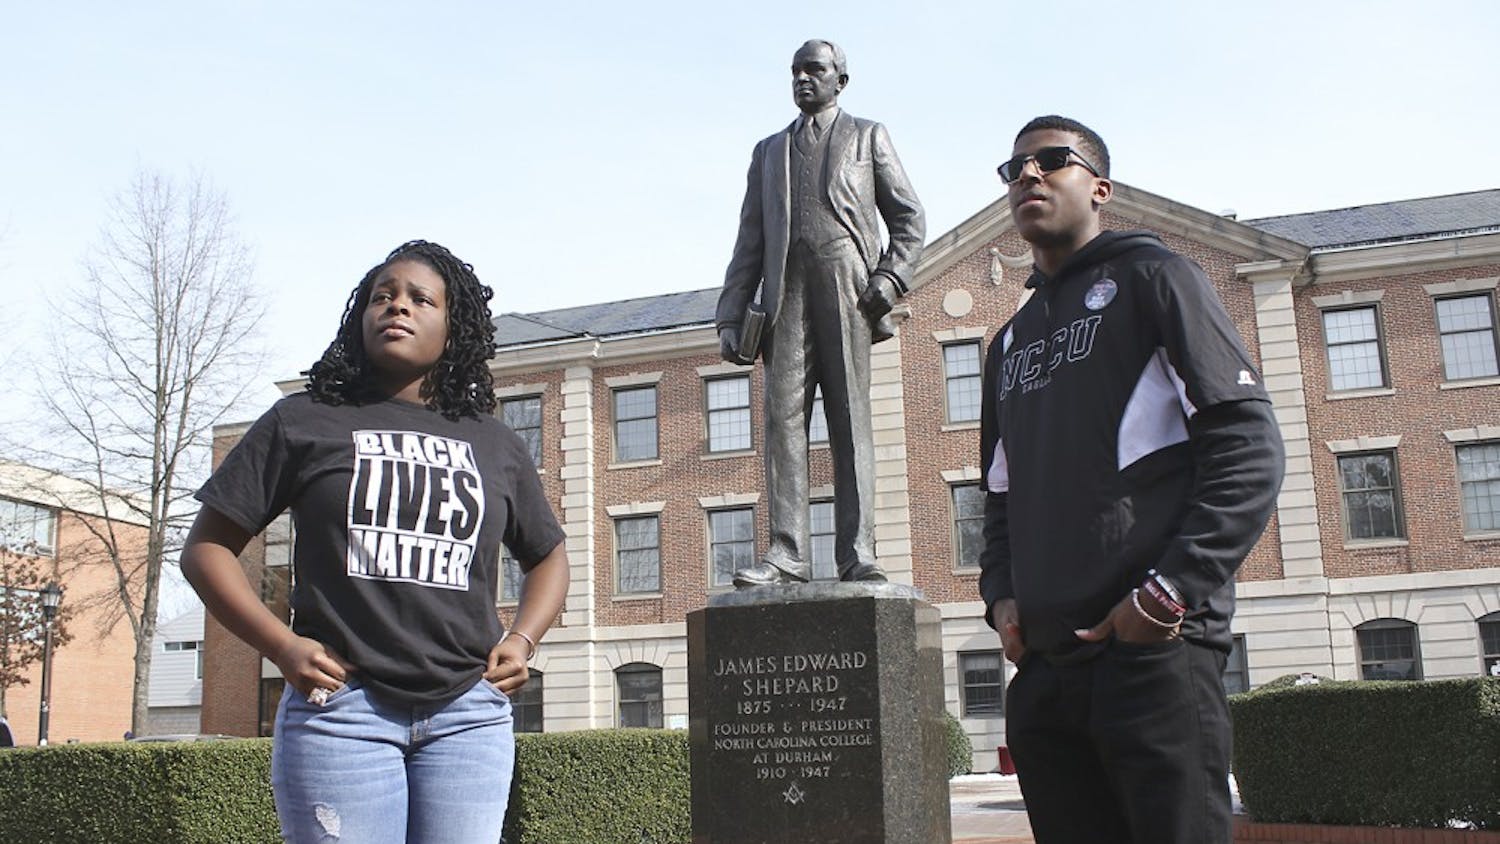 Raven Cheatham, a physical education major and Ajamu Dillahunt, a political science and history double major, both first-years at NC Central University, discuss their work as student activists. Cheatham and Dillahunt pose in front of the statue of James Shepard, founder of NCCU.